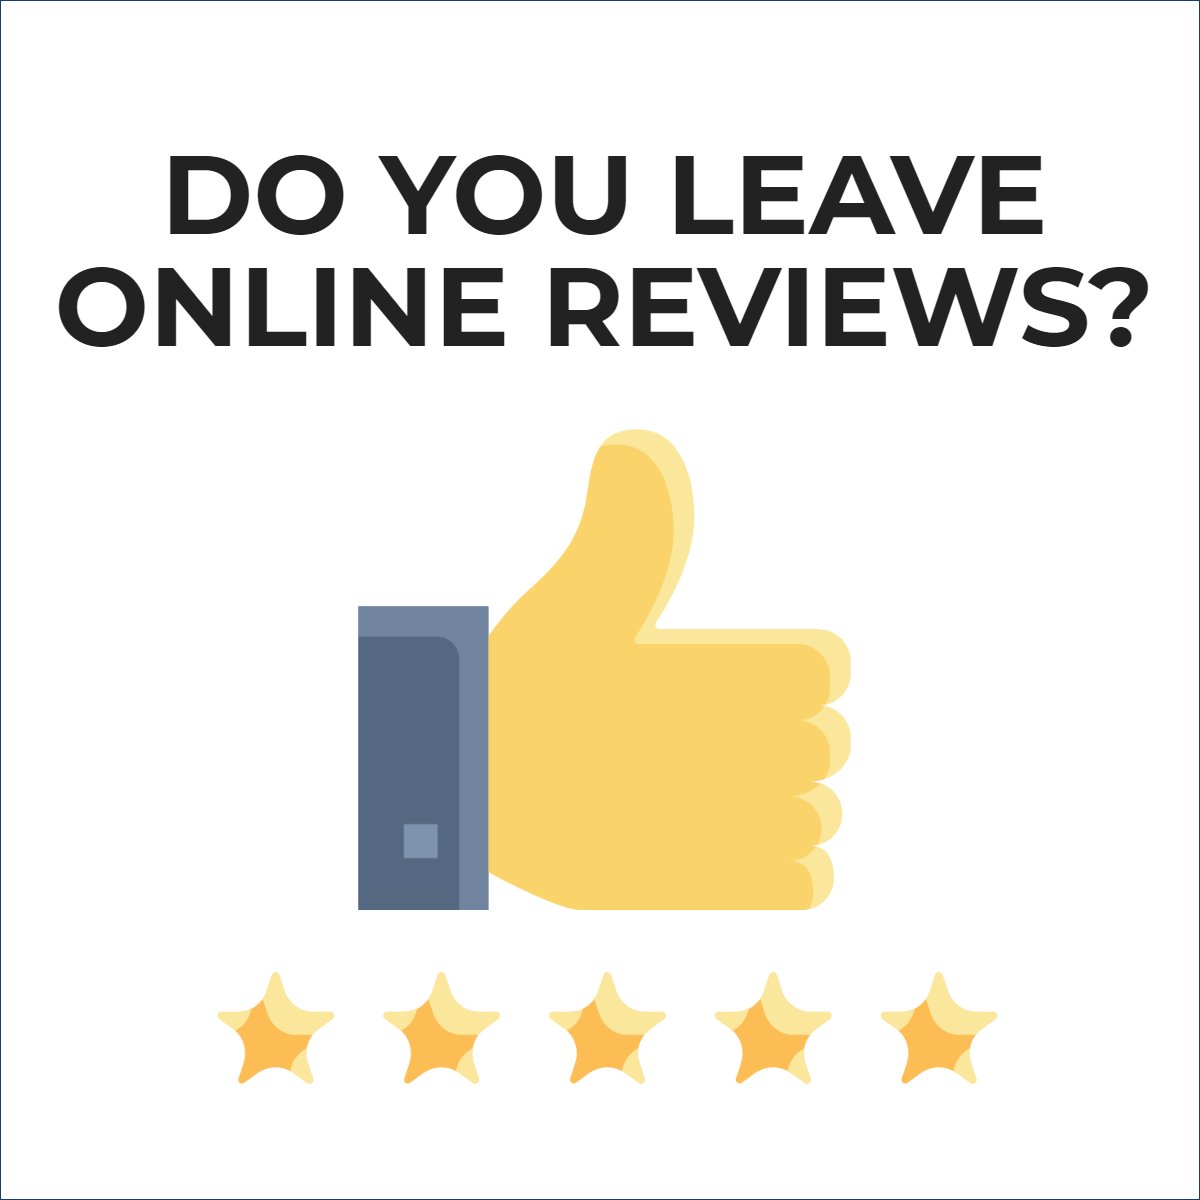 Did you know that 90% of consumers read online reviews before visiting a business? 😉

#onlinereviews #onlinereviewsmatter #realestate #realestatecoach #digitalmarketing #reviews #reputation 
 #HOMES #LISTINGS #FORSALE #HOMEFORSALE